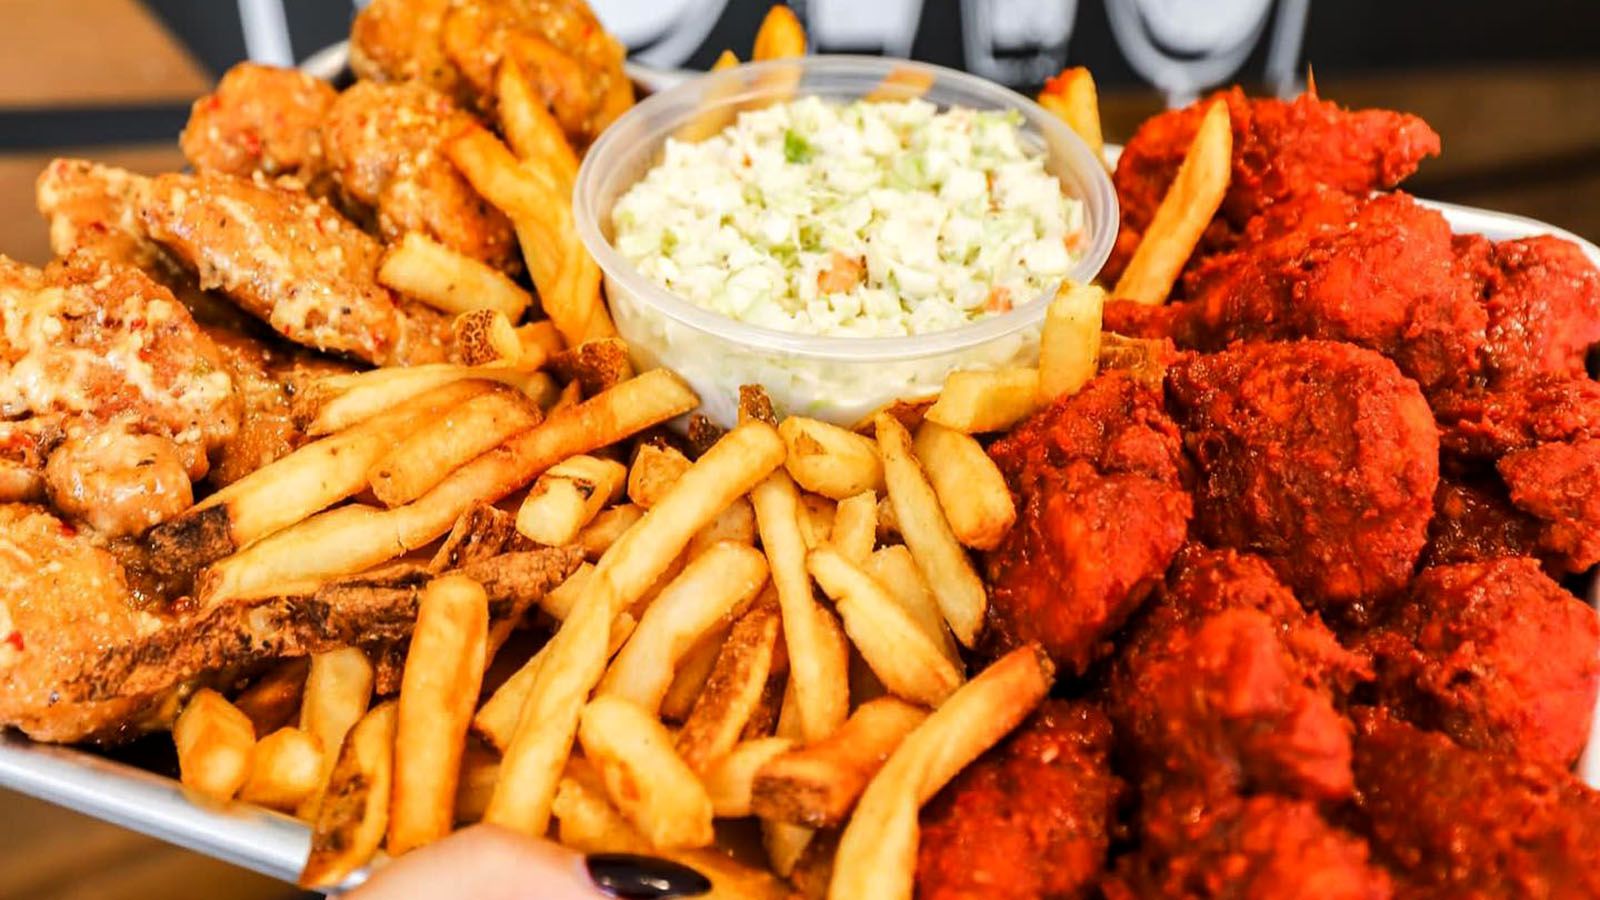 Detroit Wing Company hopes to open in Fort Wayne by the end of 2023.